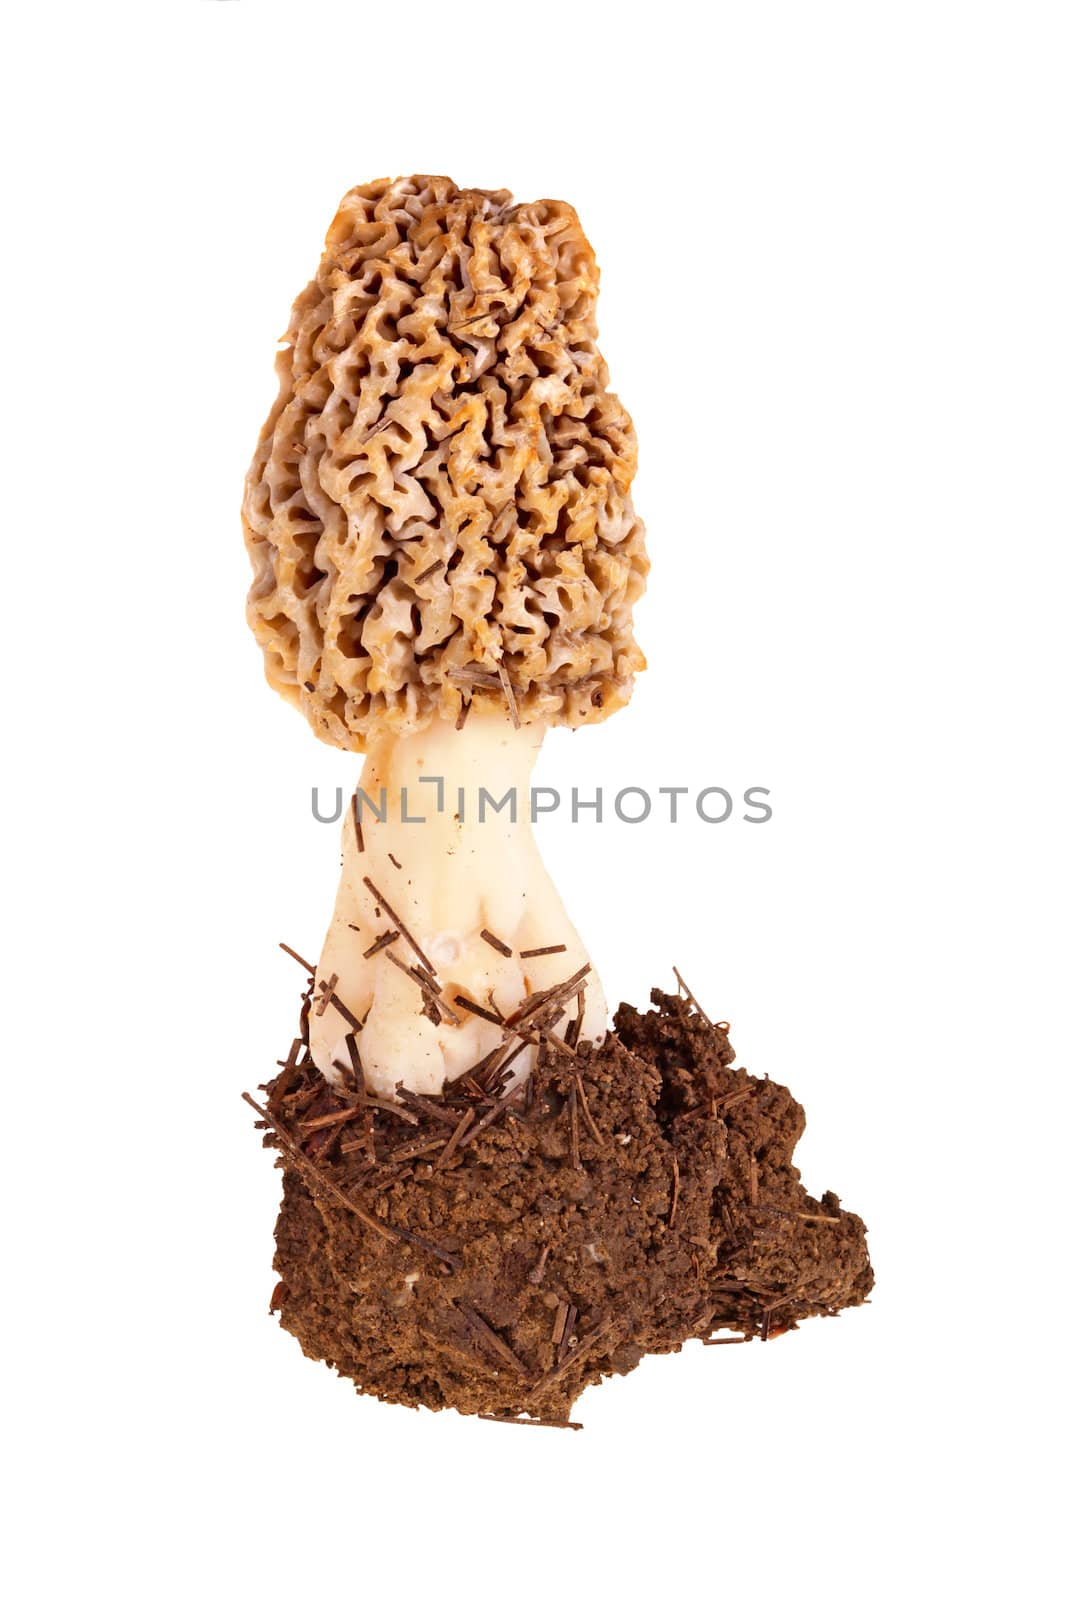 Fresh morel mushroom and soil against white by sgoodwin4813